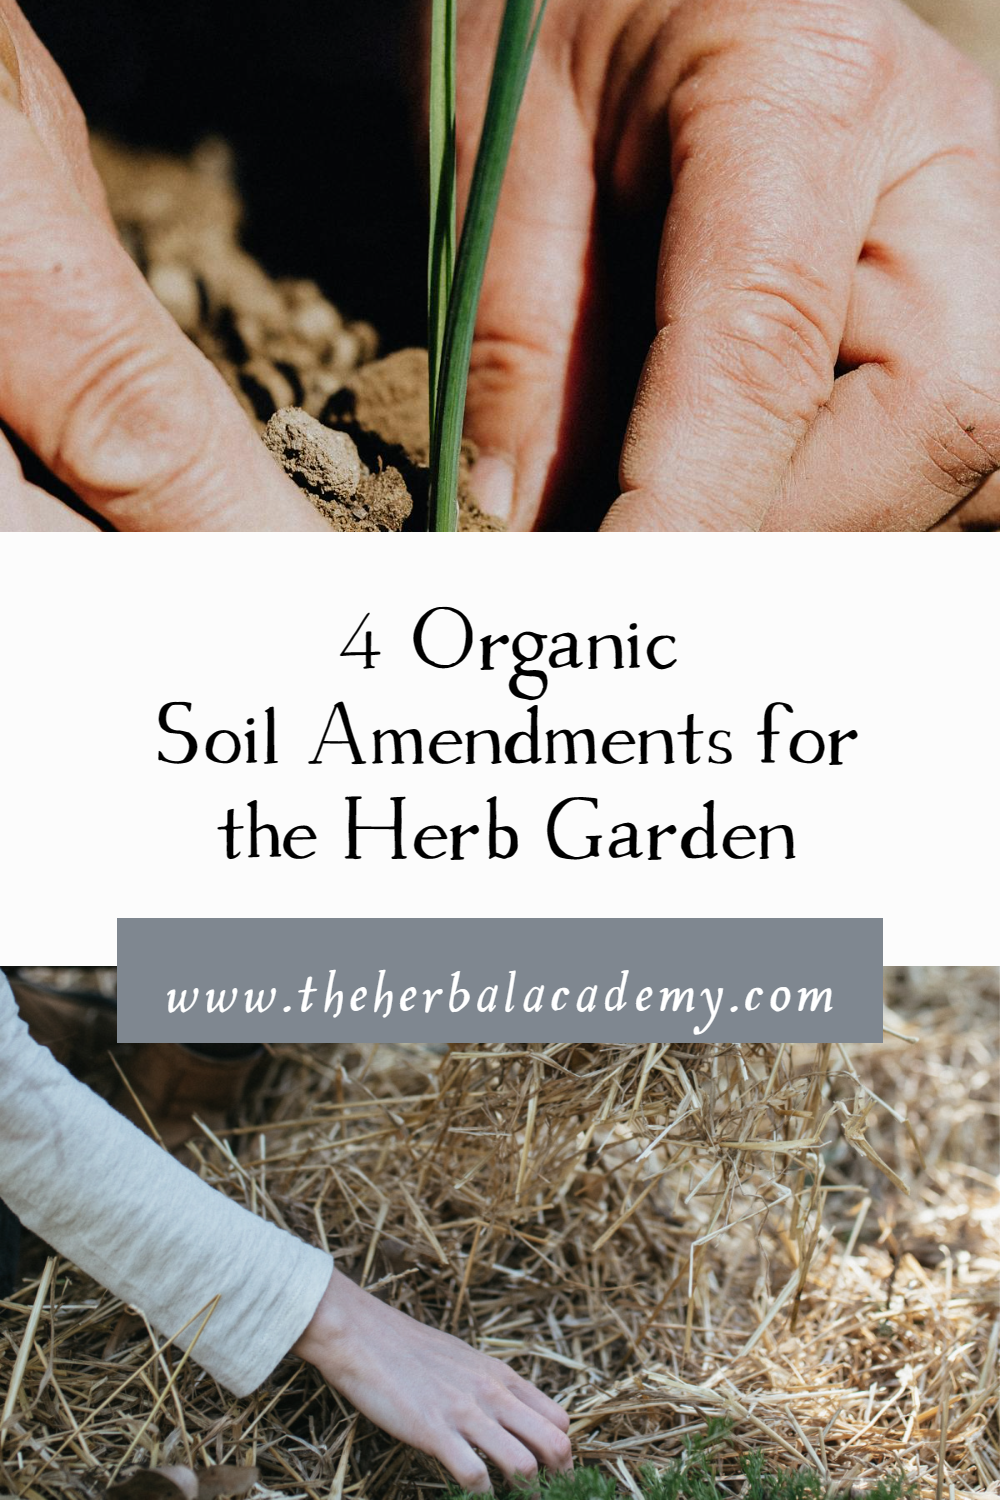 4 Organic Soil Amendments for the Herb Garden | Herb Graden| If you’re looking to cultivate an herb garden that is sustainable, using organic soil amendments will be one aspect of helping it to thrive.